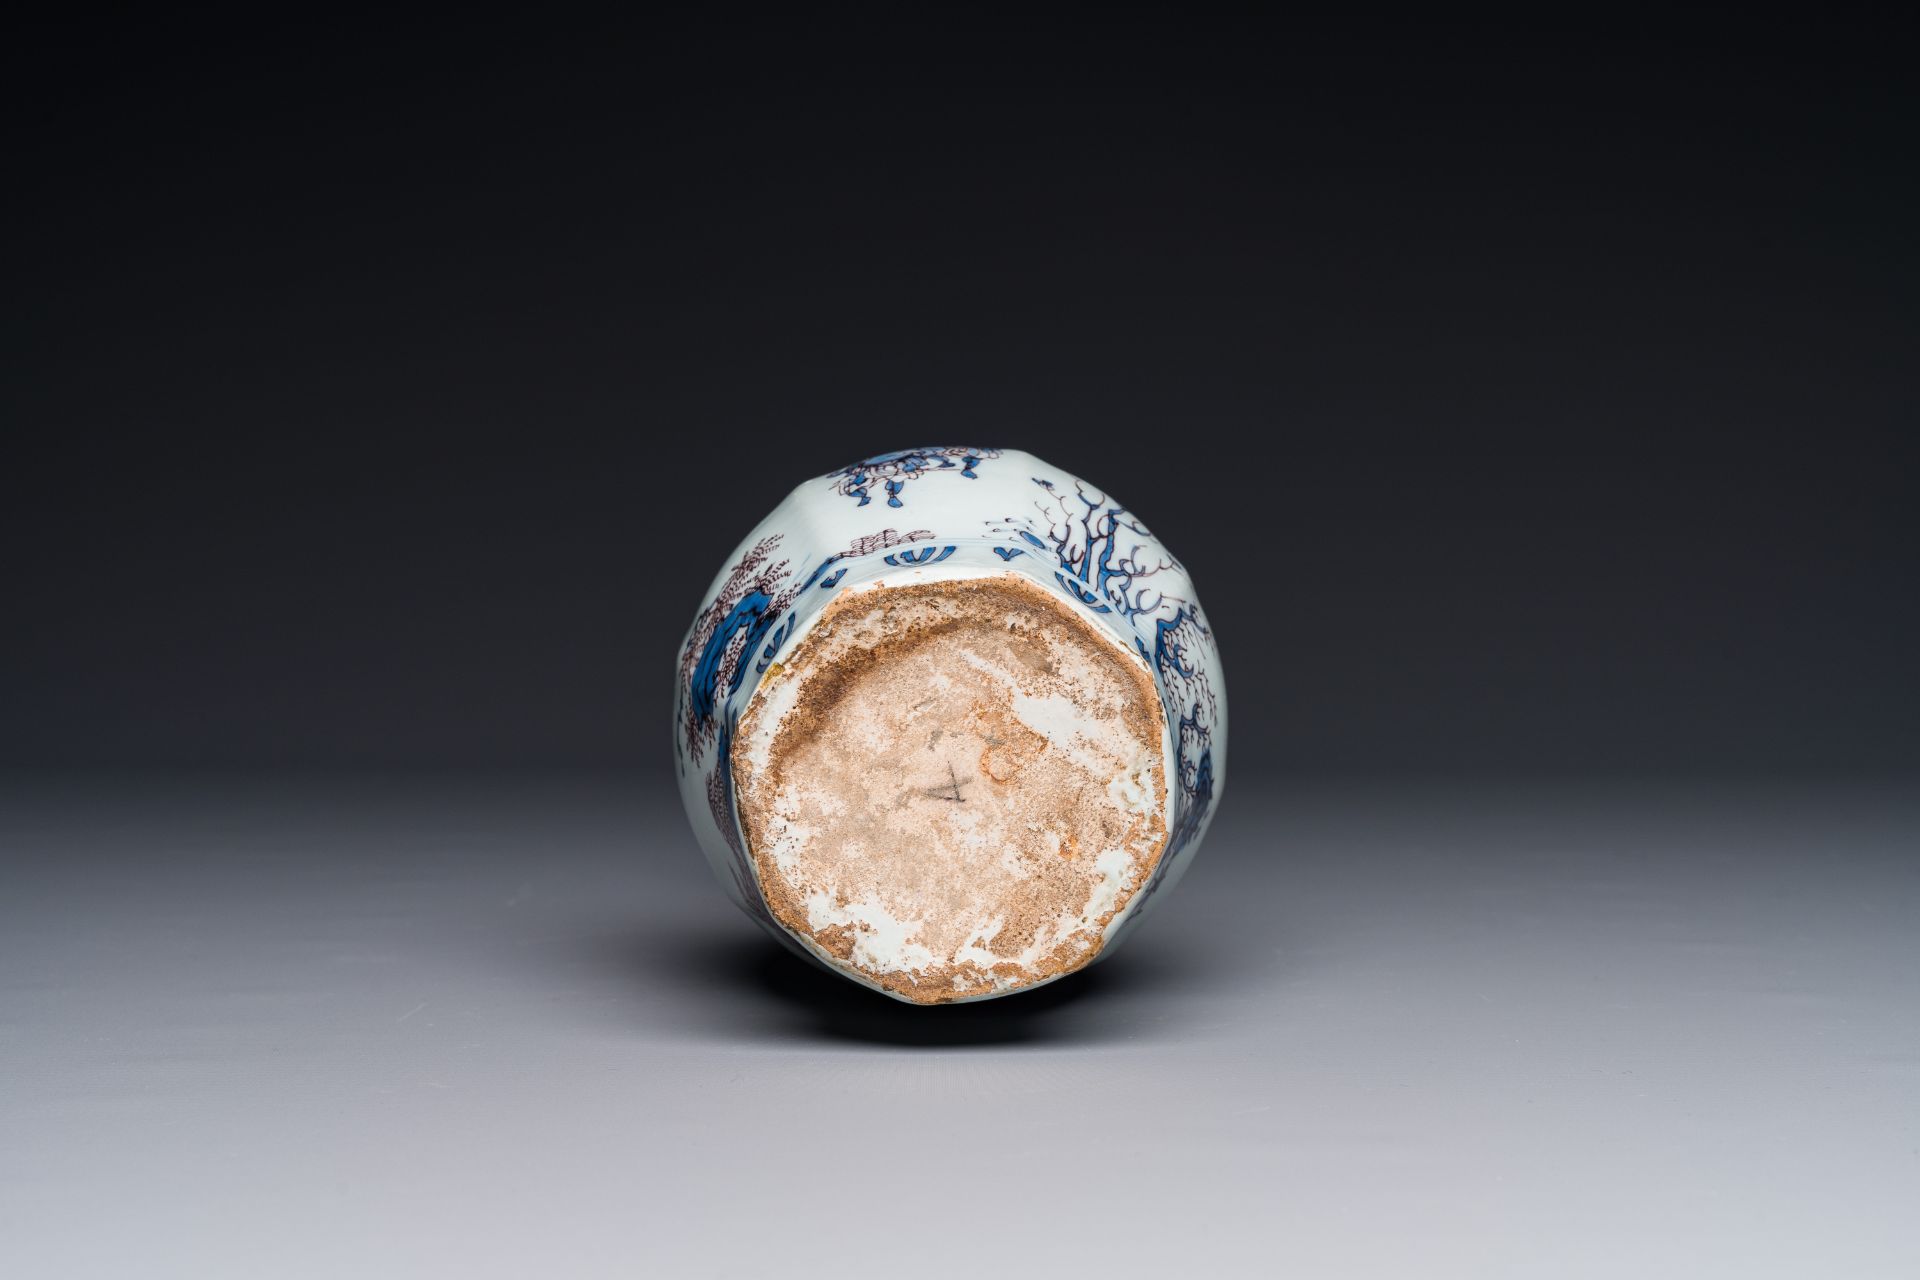 A fine Dutch Delft blue, white and manganese chinoiserie bottle vase, late 17th C. - Image 5 of 7